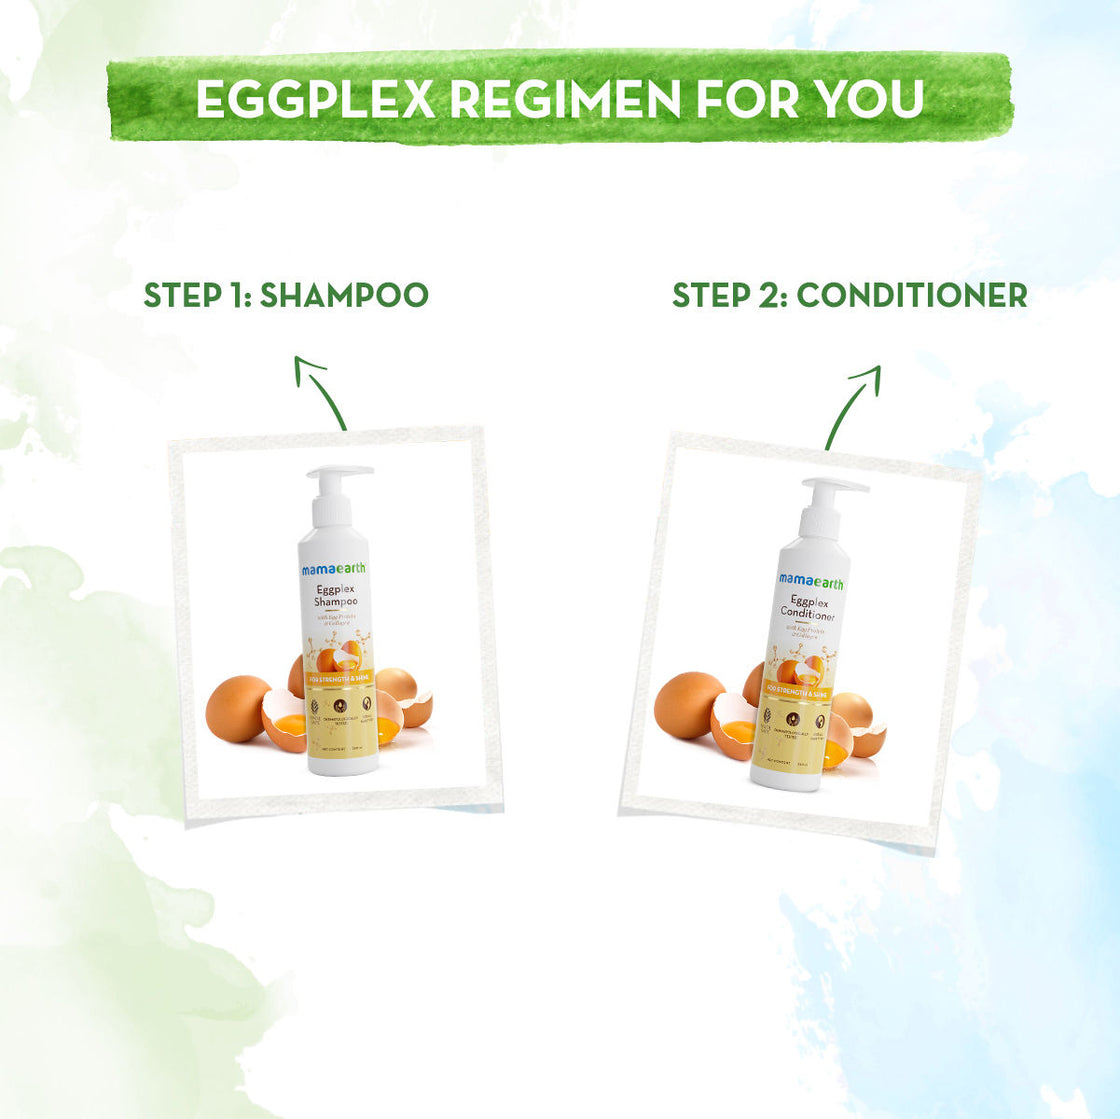 Mamaearth Eggplex Shampoo With Egg Protein For Strength And Shine-3